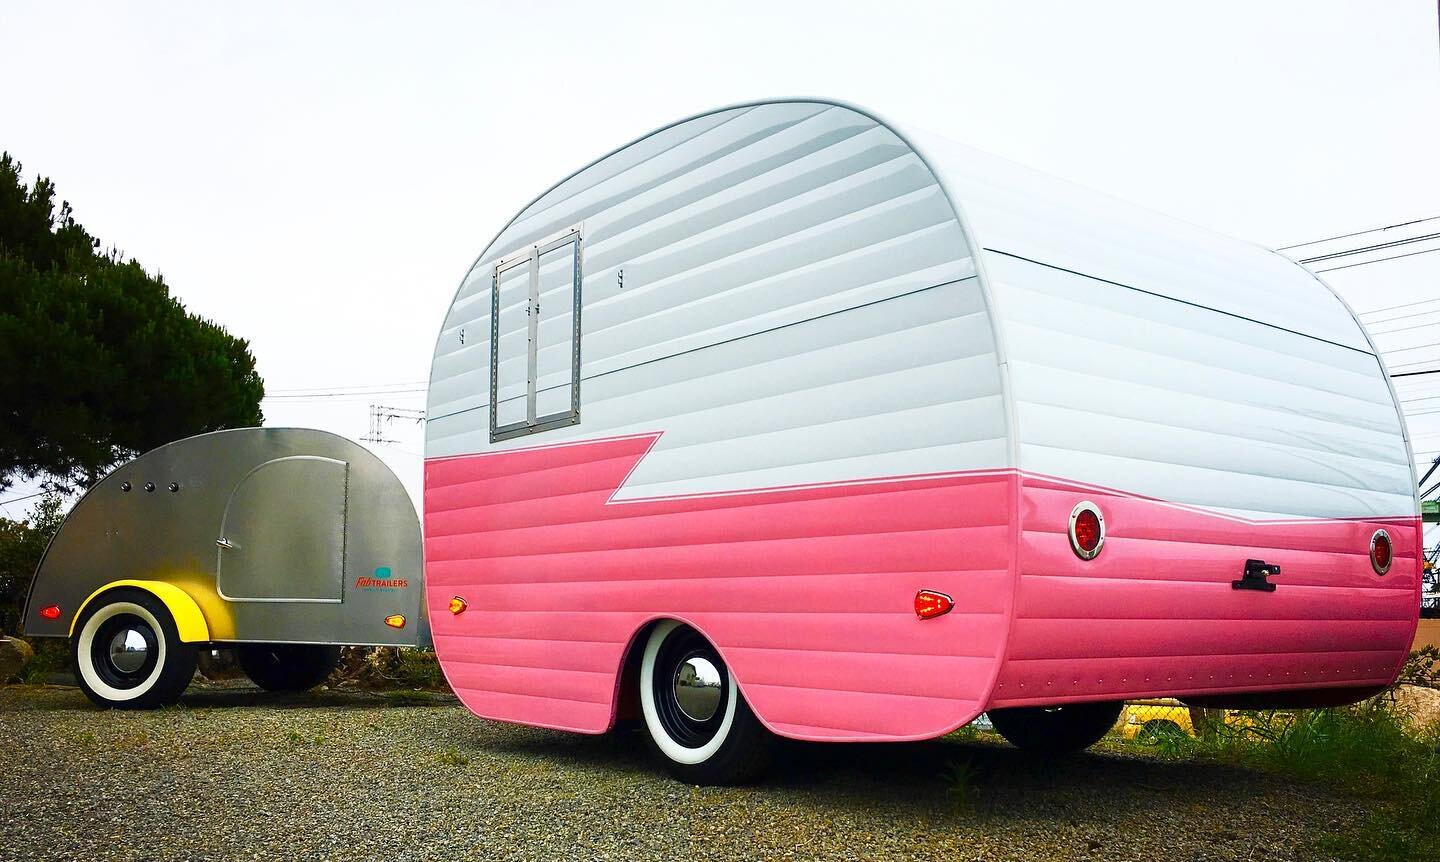 We recently re-acquired two pink and white Hamsters we built for a resort client a couple of years back. These are brand new builds, not re-habbed vintage trailers. Lightly used, empty inside and ready for your photo booth, tap trailer or as an extra